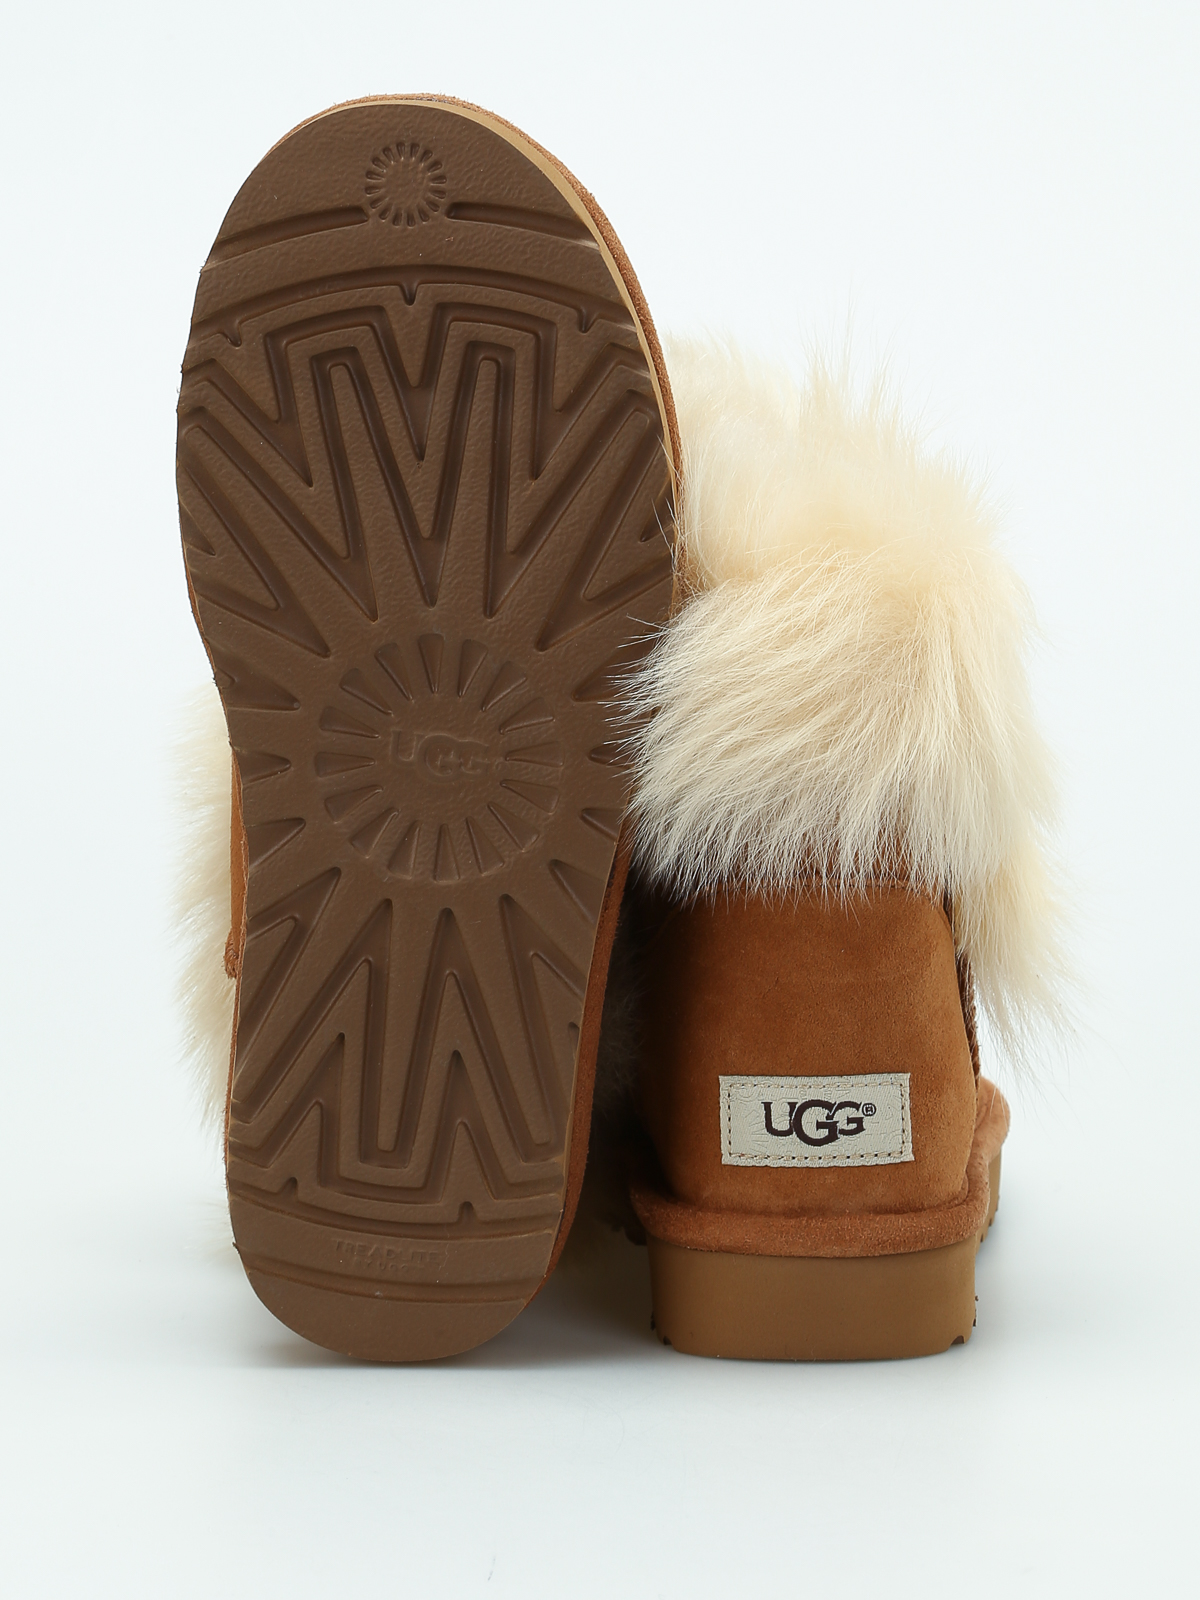 Ankle boots Ugg Milla boots - 1018303WCHE | Shop online at